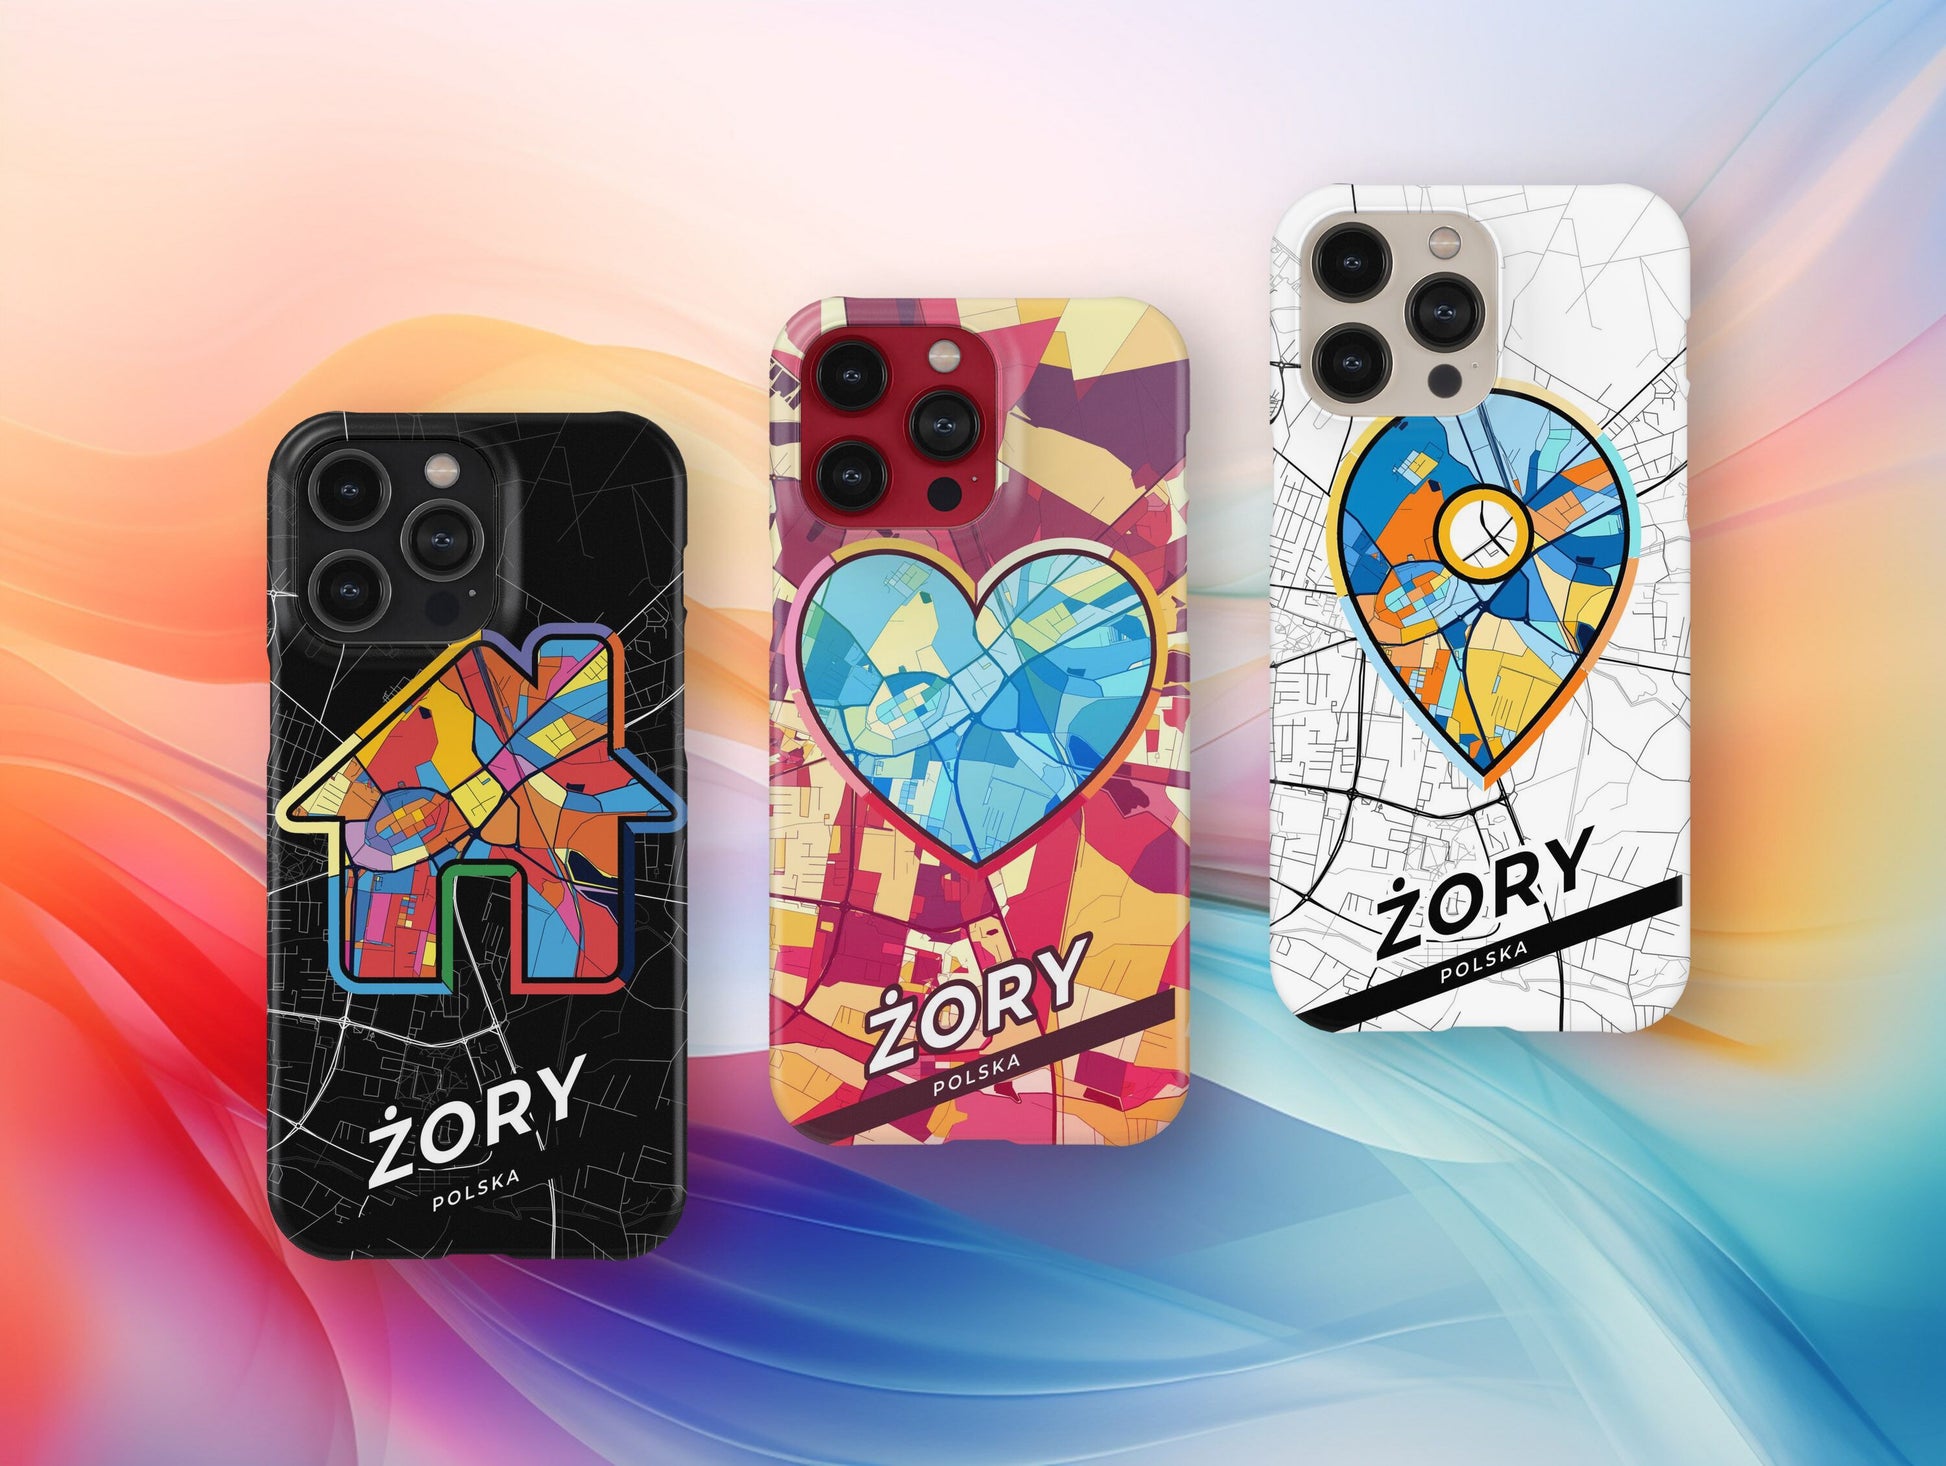 Żory Poland slim phone case with colorful icon